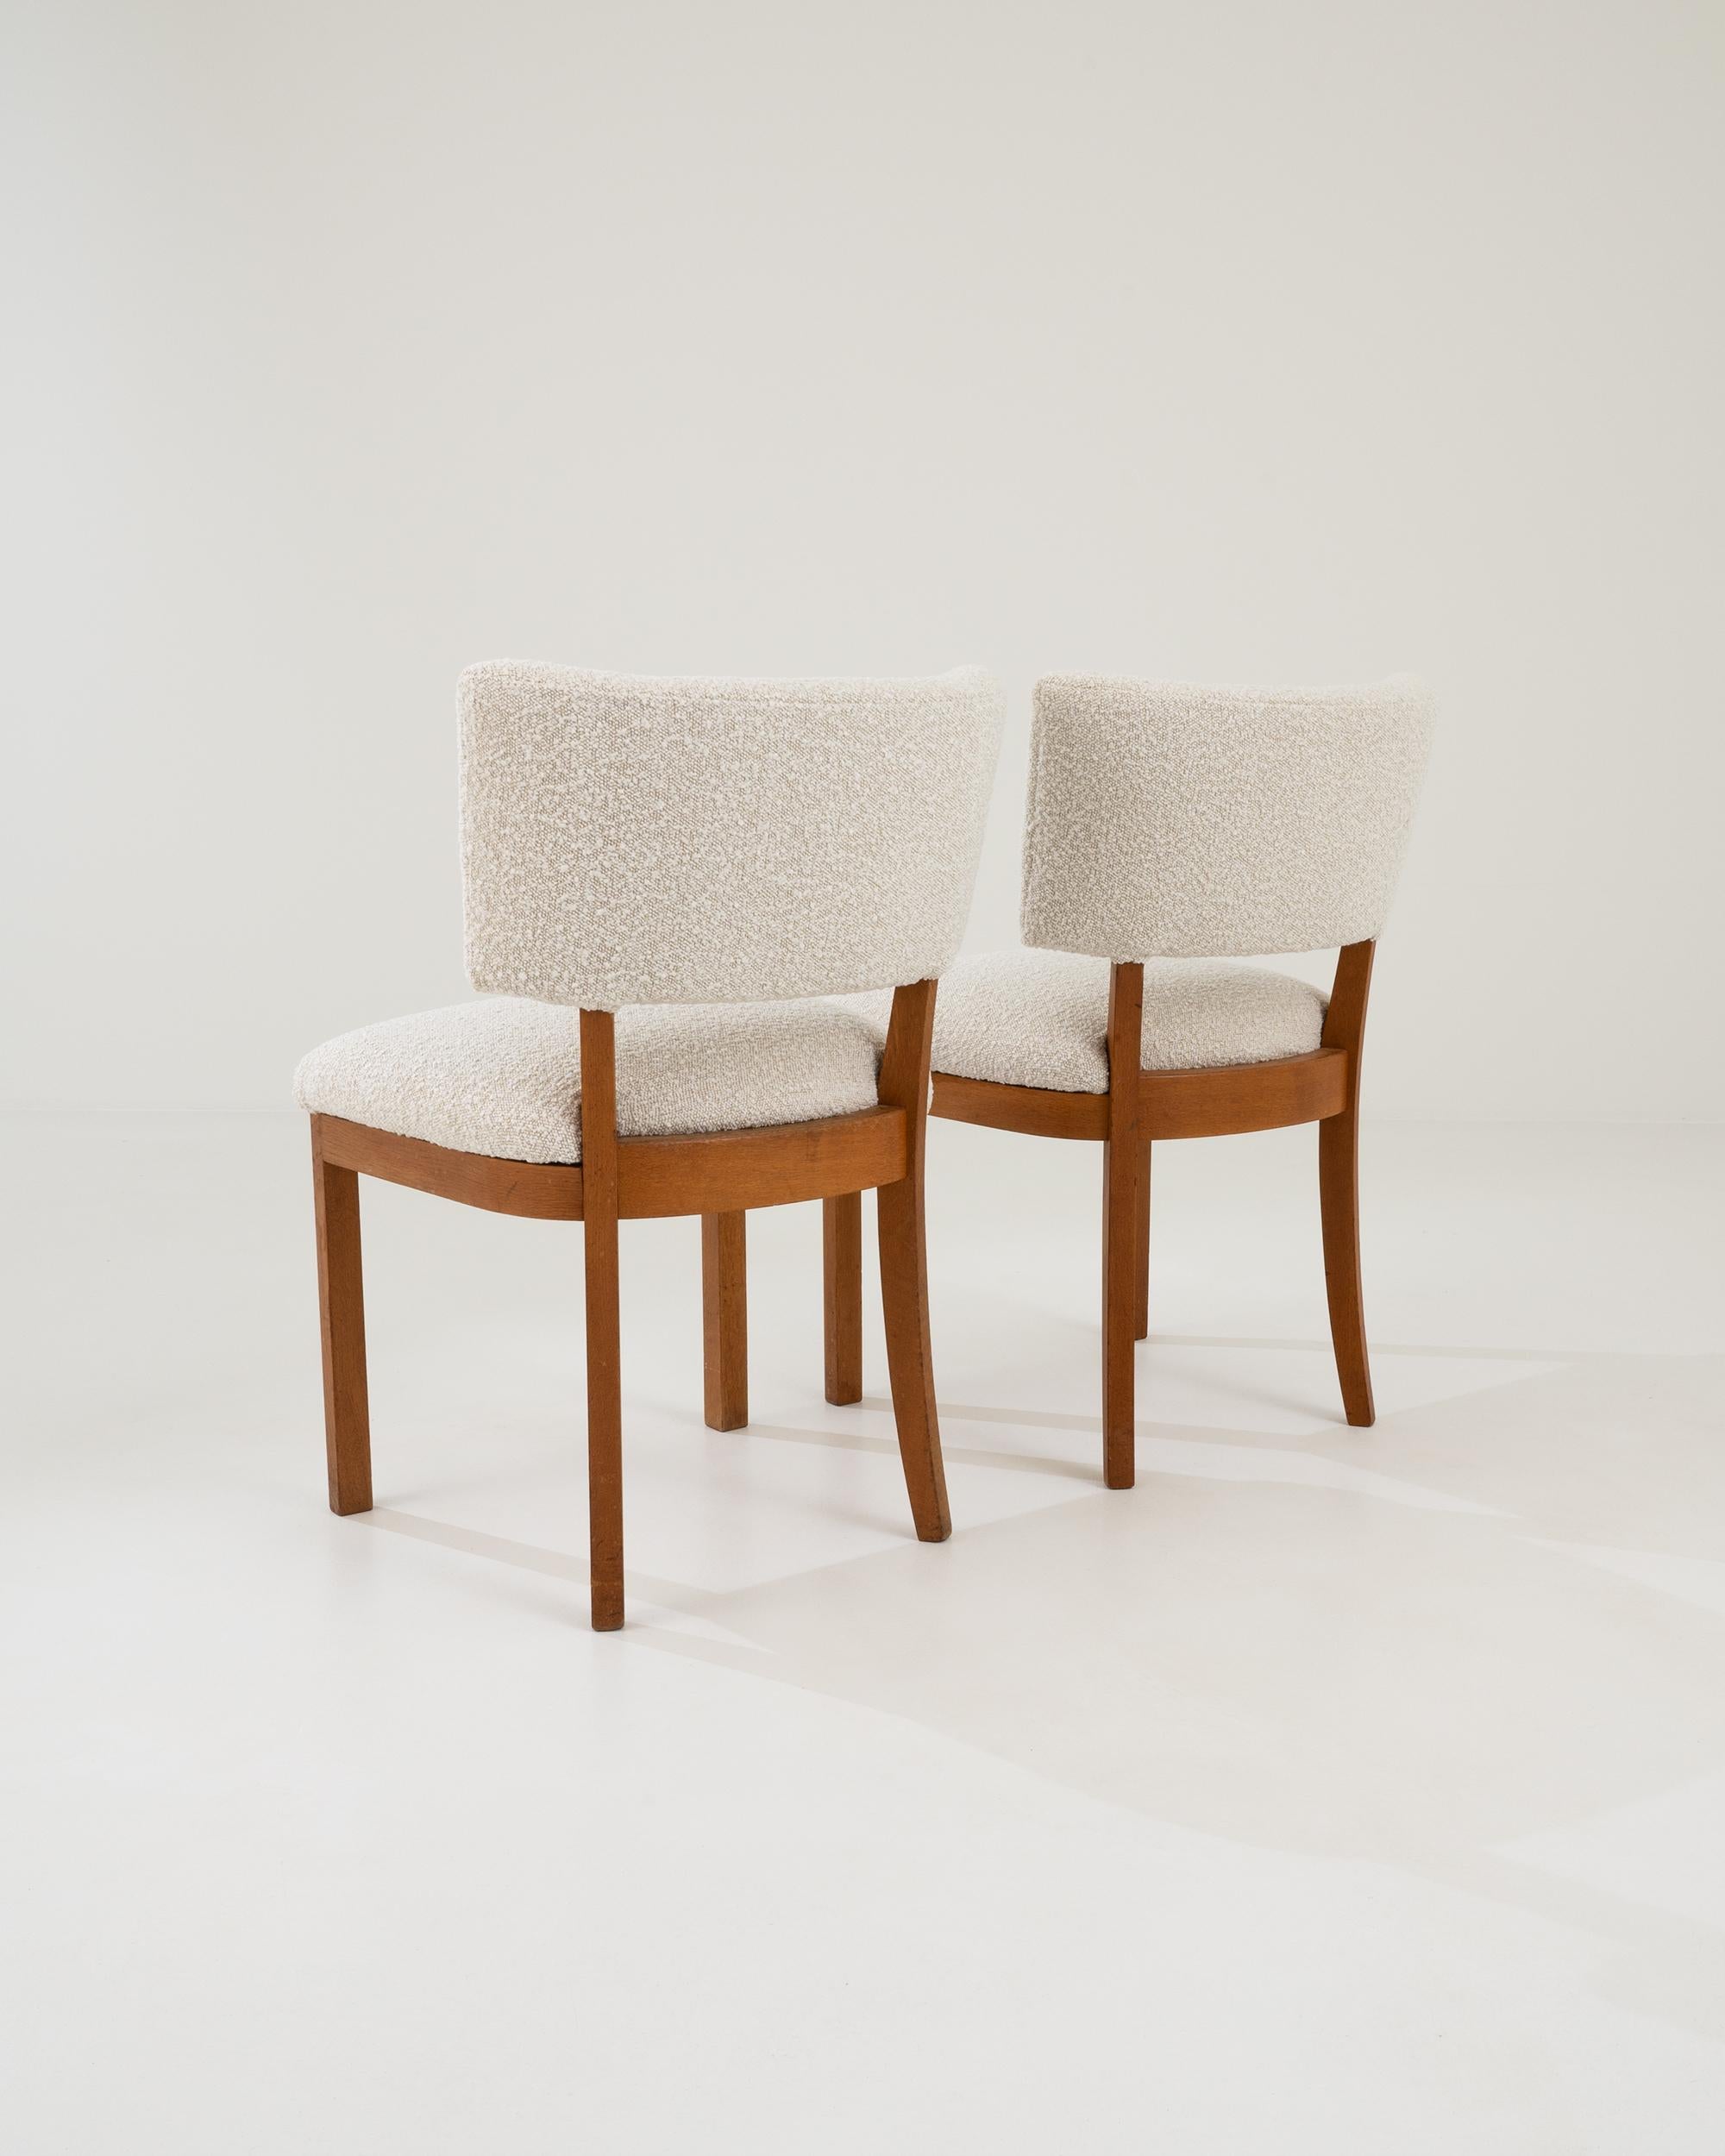 20th Century Czech Upholstered Dining Chairs, a Pair For Sale 3